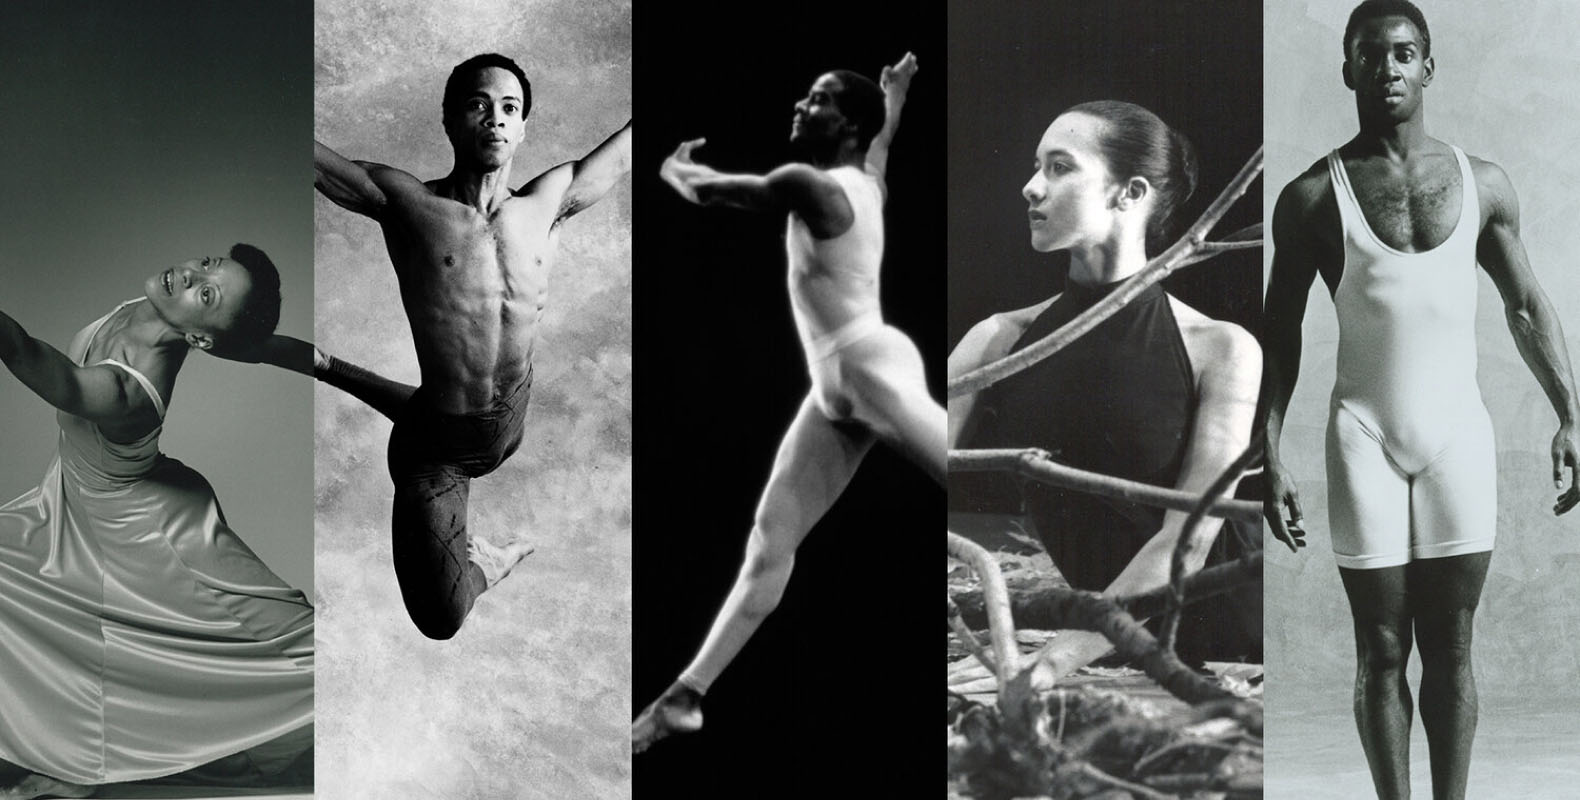 Multiple black and white photos of dancers performing from the past